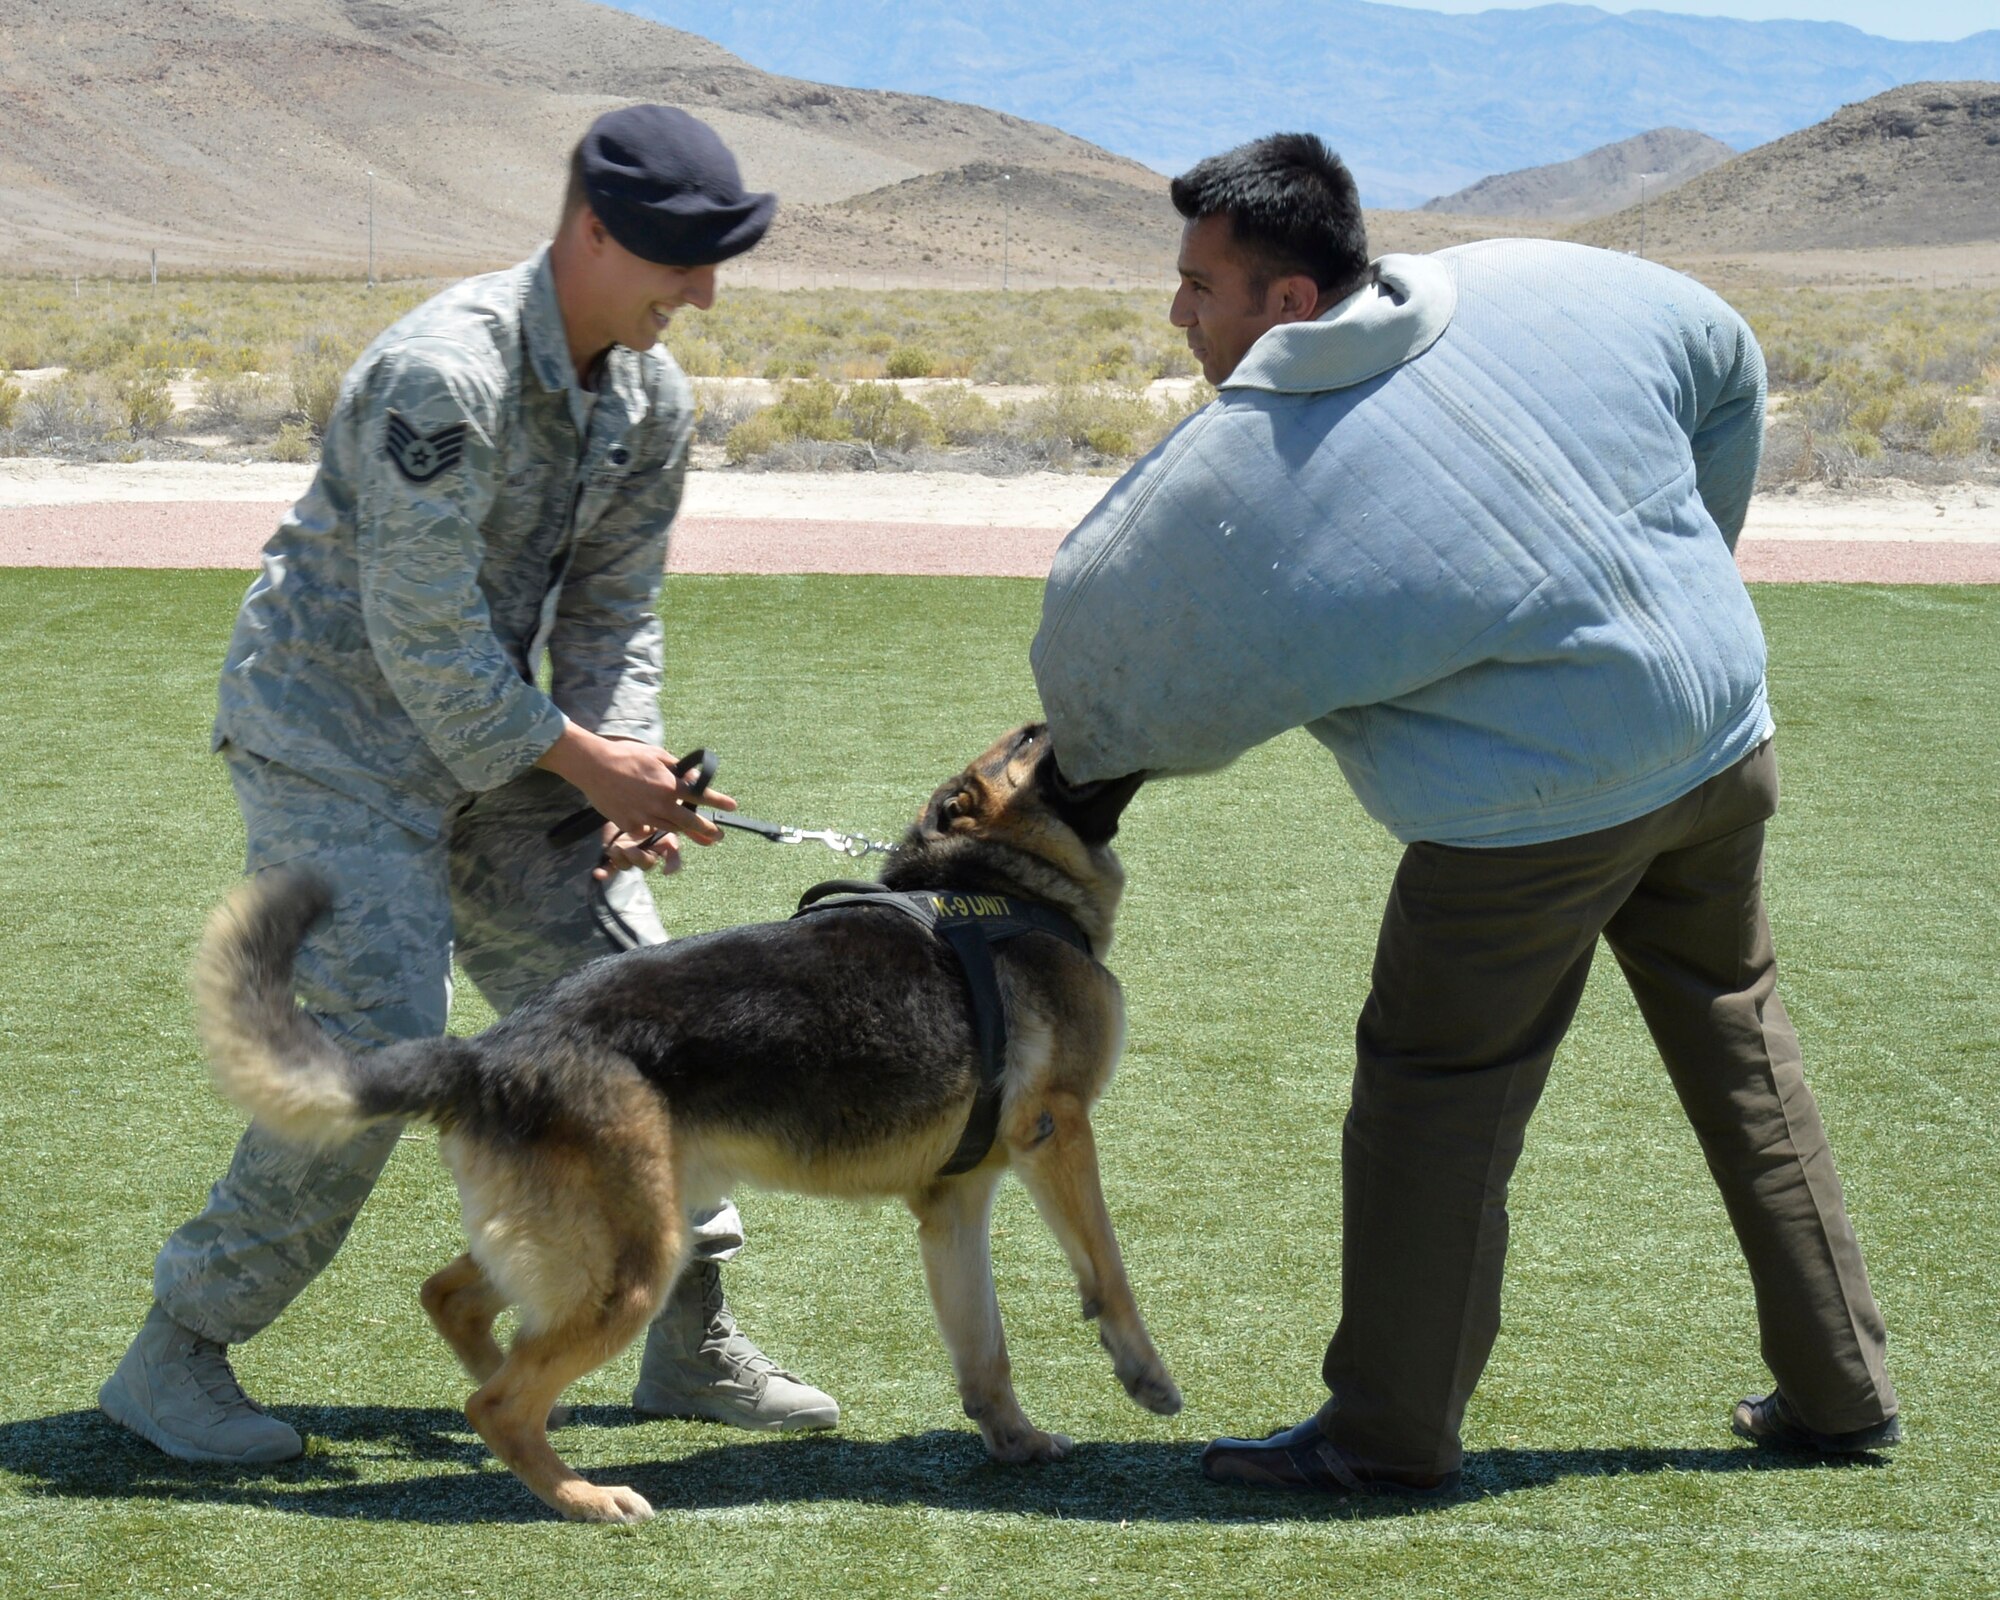 Alejandro, right, a Creech Air Force Base member, participates in a military working dog demonstration during National Police Week May 13, 2014. Police Week is a nation-wide event proclaimed by the president of the United States during the week of May 15 each year to recognize all law enforcement officers who have paid the ultimate sacrifice (Last names have been withheld for security reasons).(U.S. Air Force photo by Staff Sgt. A.K./Released)